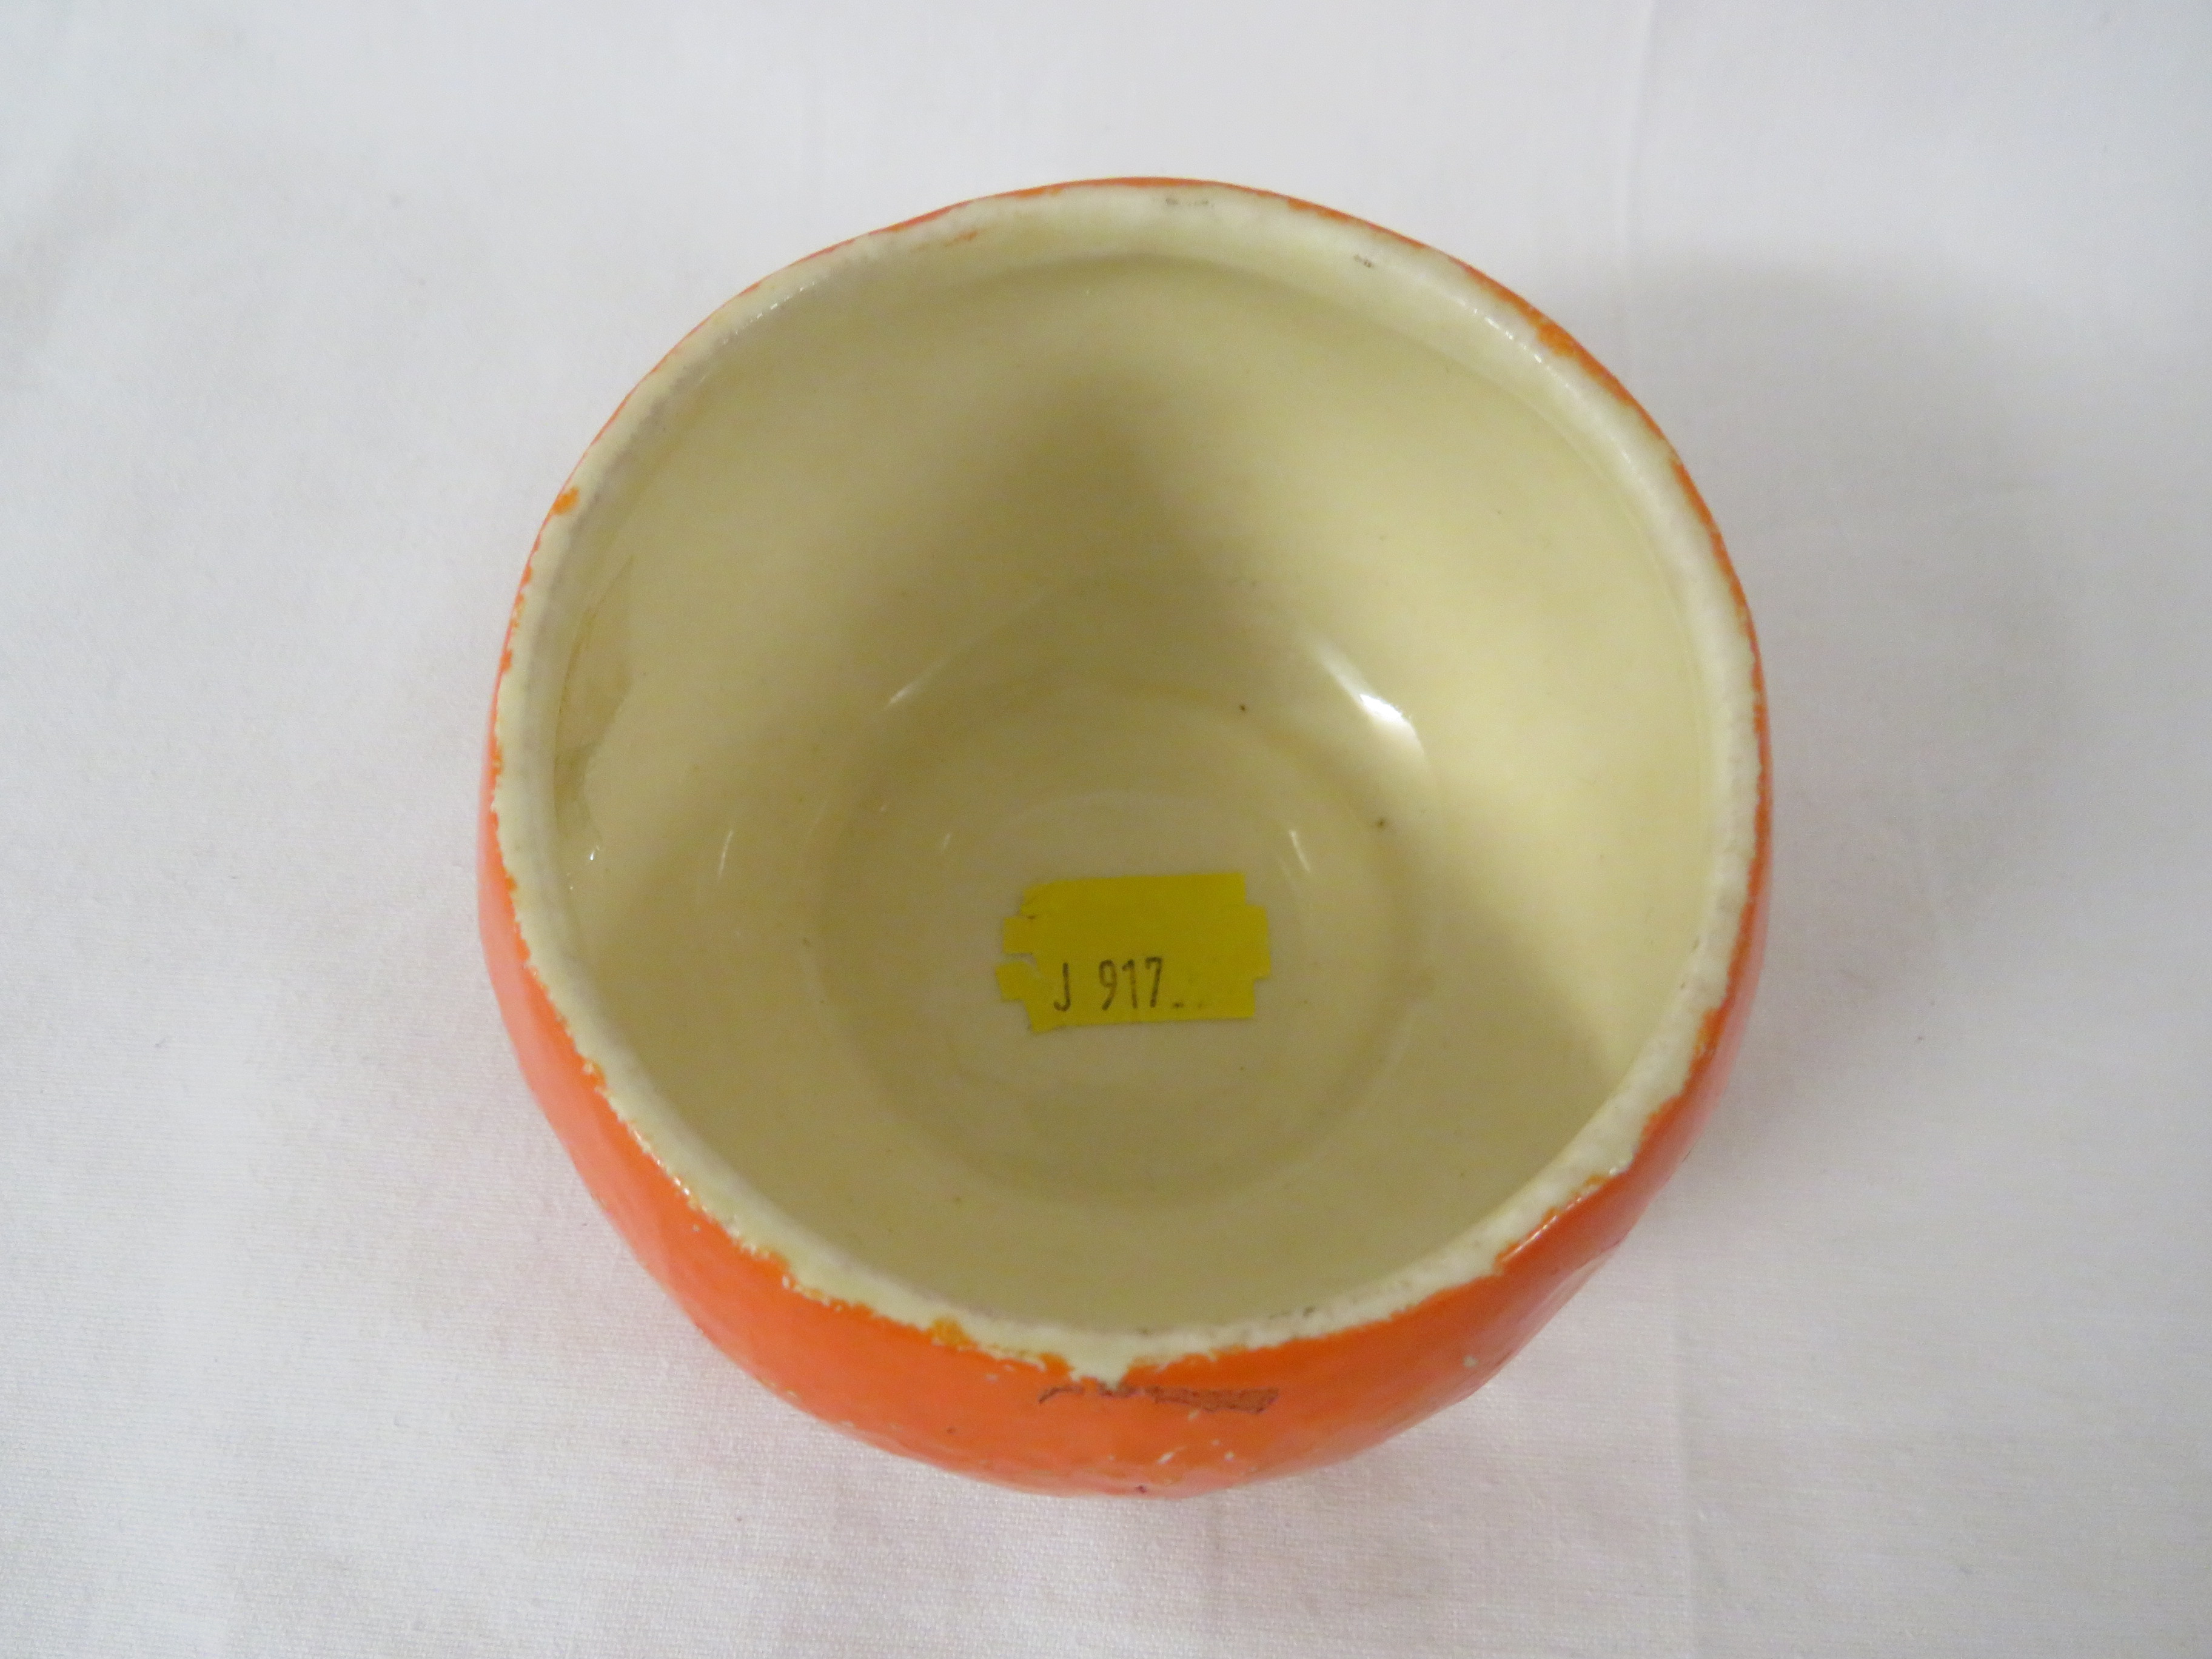 Clarice Cliff Newport Pottery marmalade pot modelled as an orange - Image 3 of 6